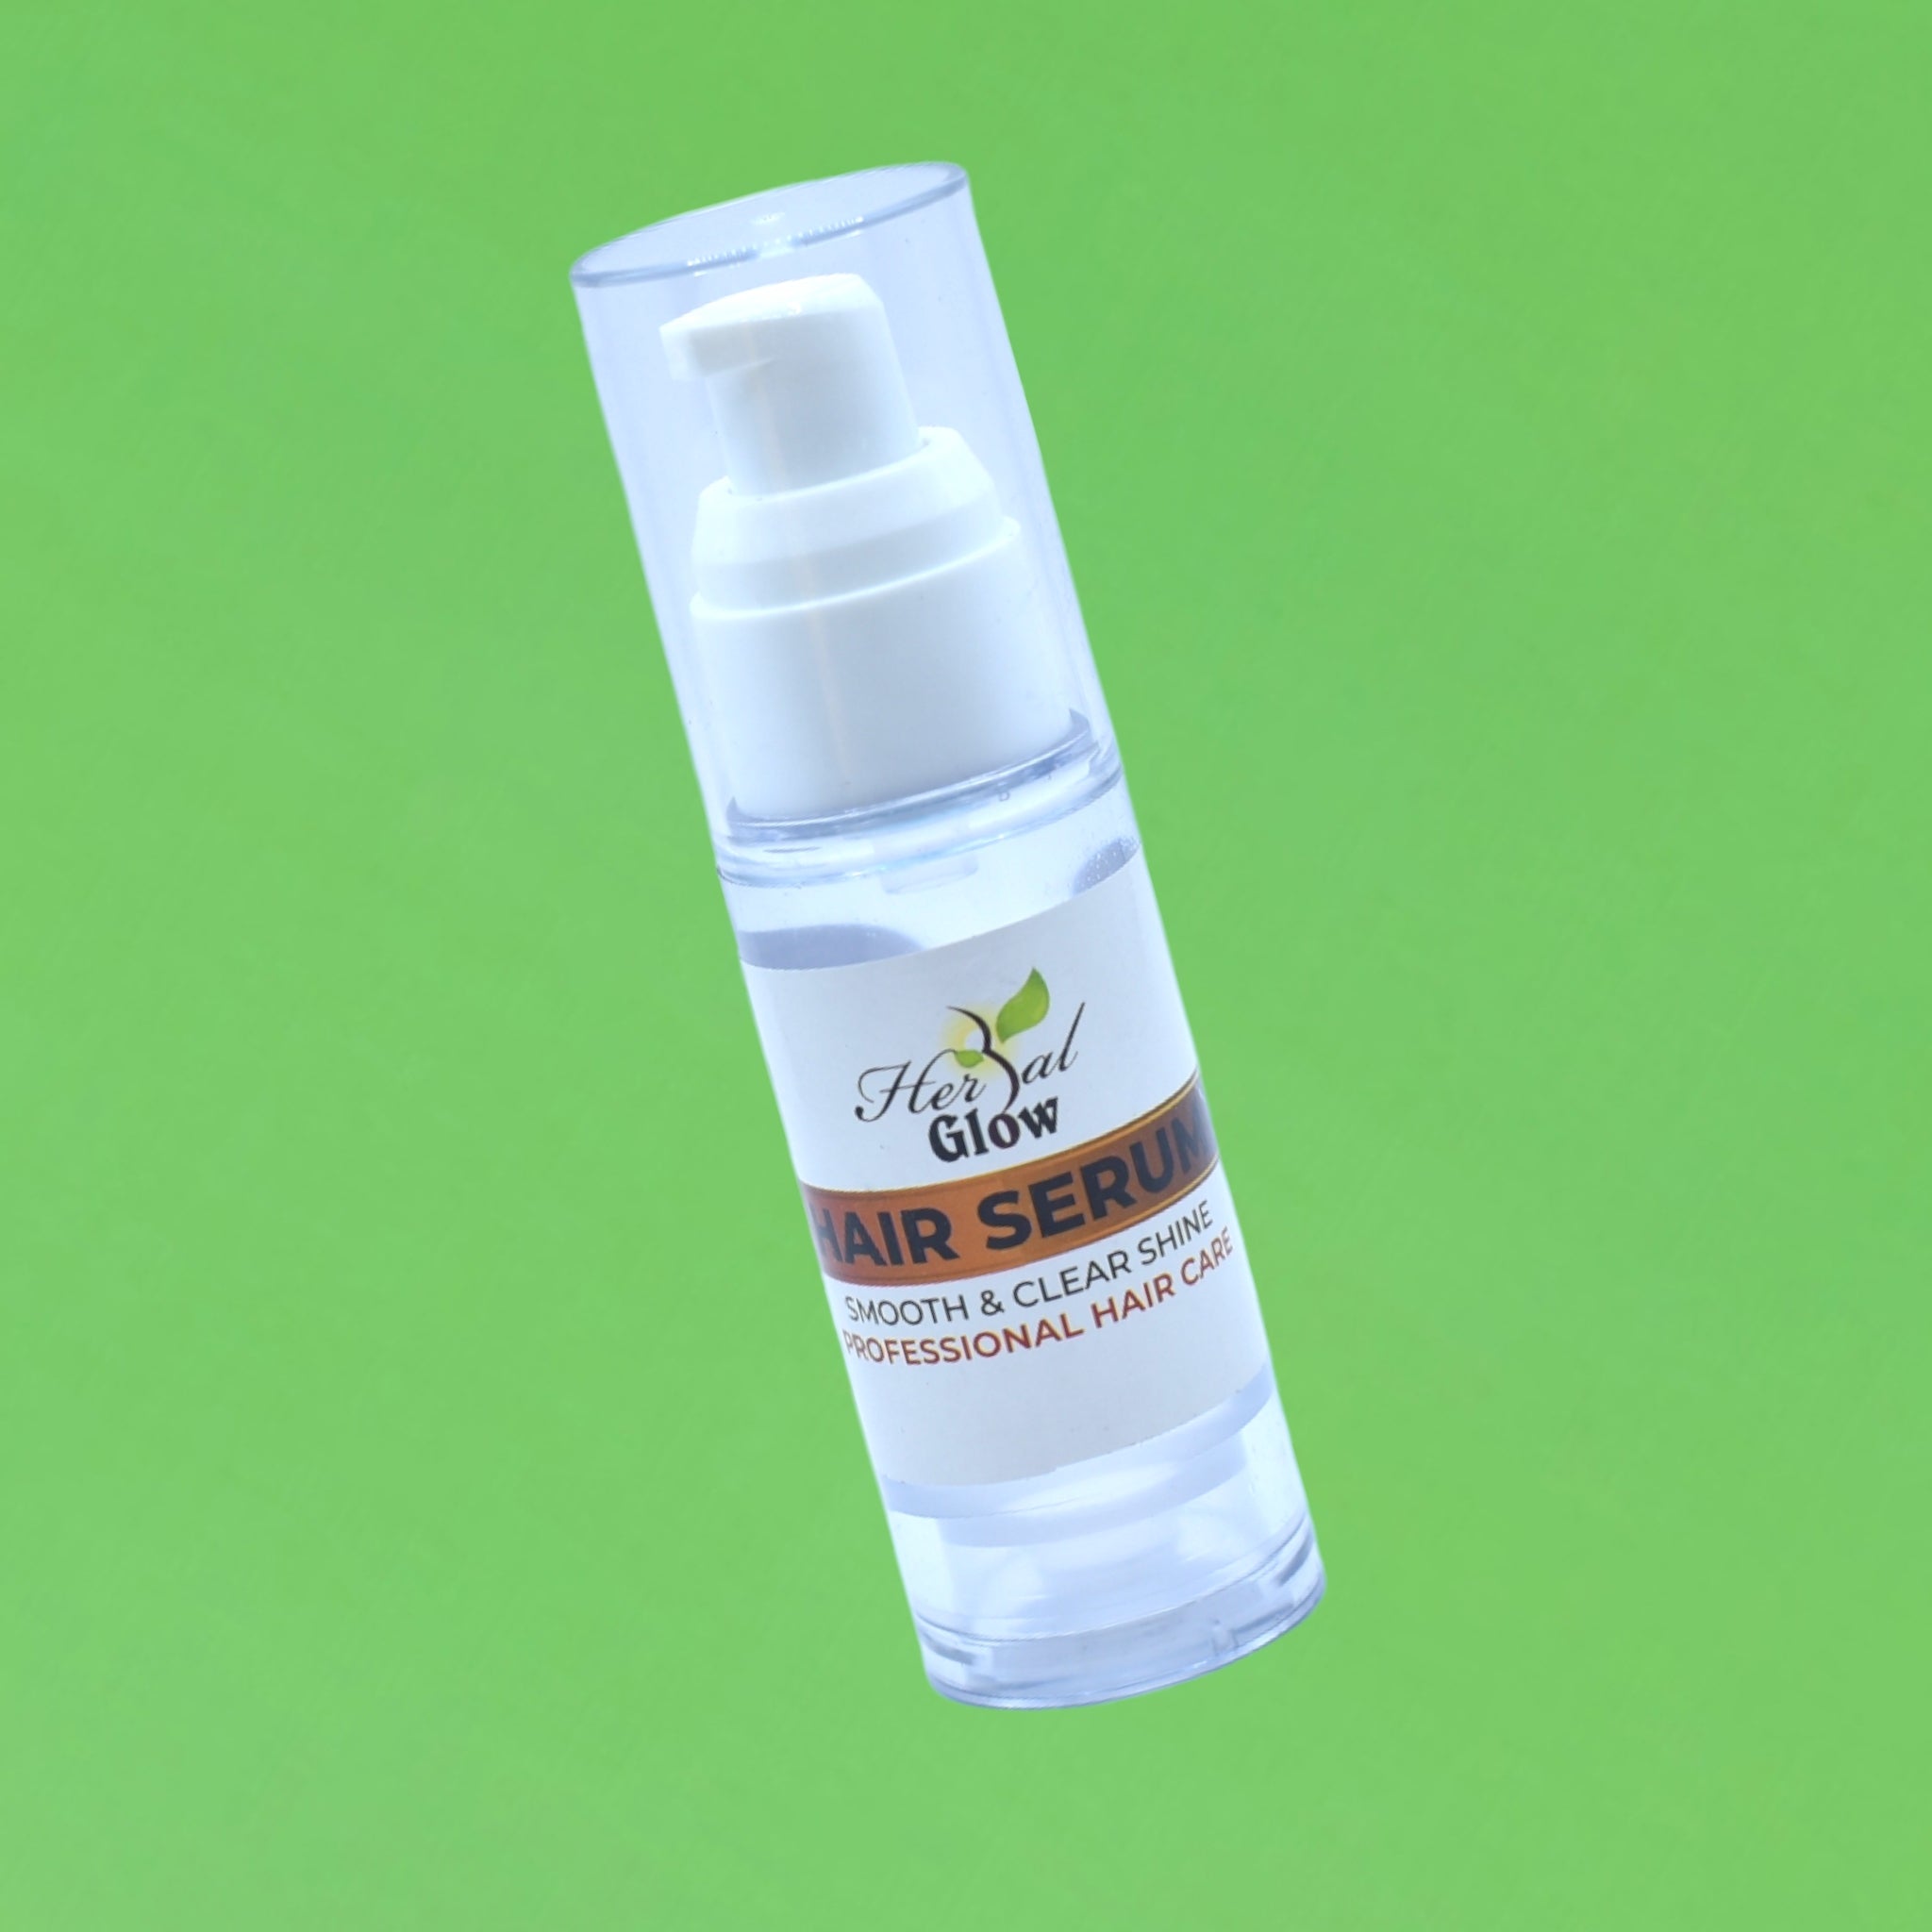 Hair Serum - Smooth glow  and Shine by Herbal Glow